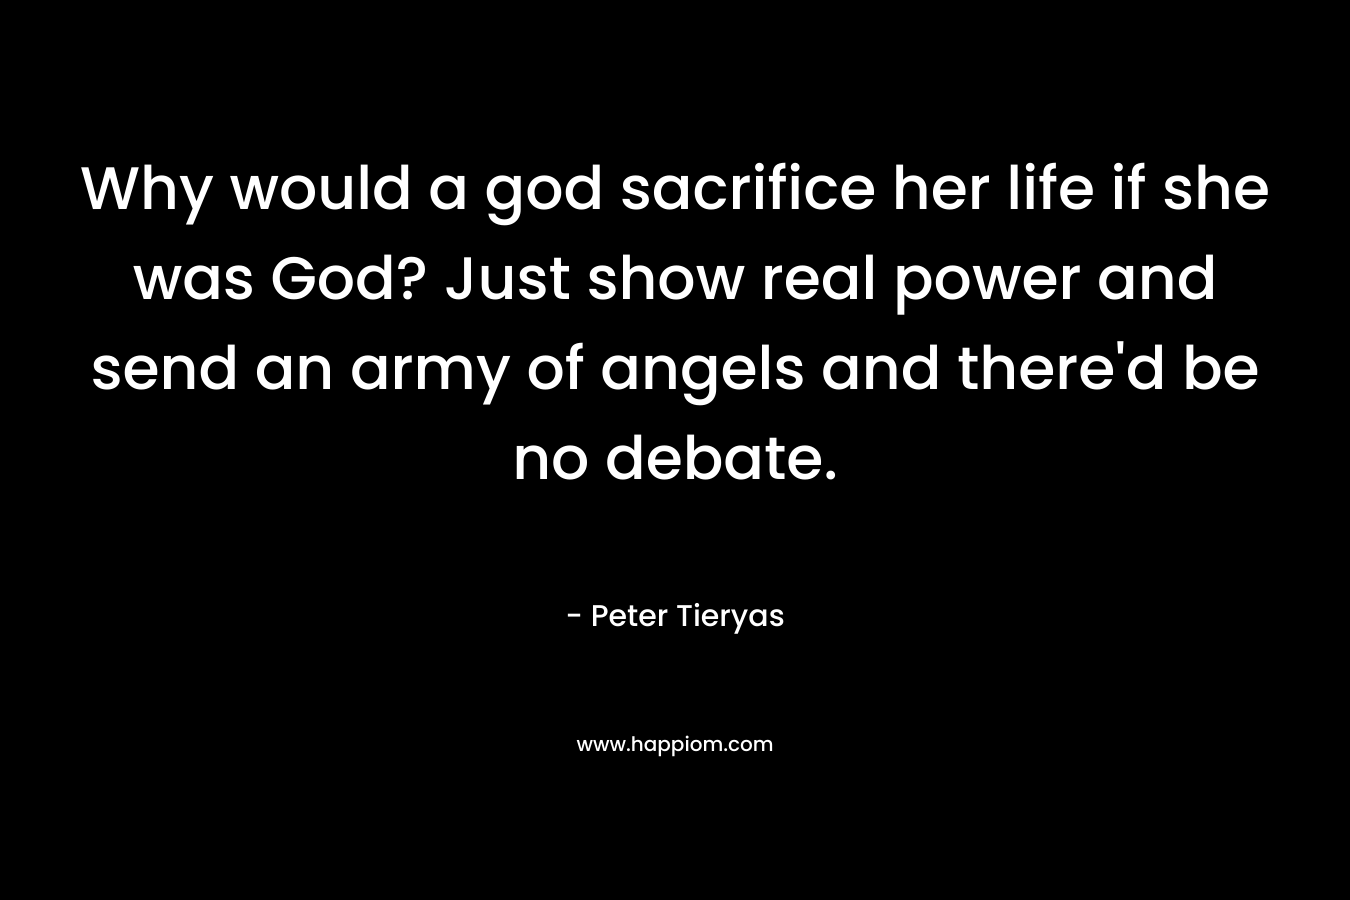 Why would a god sacrifice her life if she was God? Just show real power and send an army of angels and there’d be no debate. – Peter Tieryas